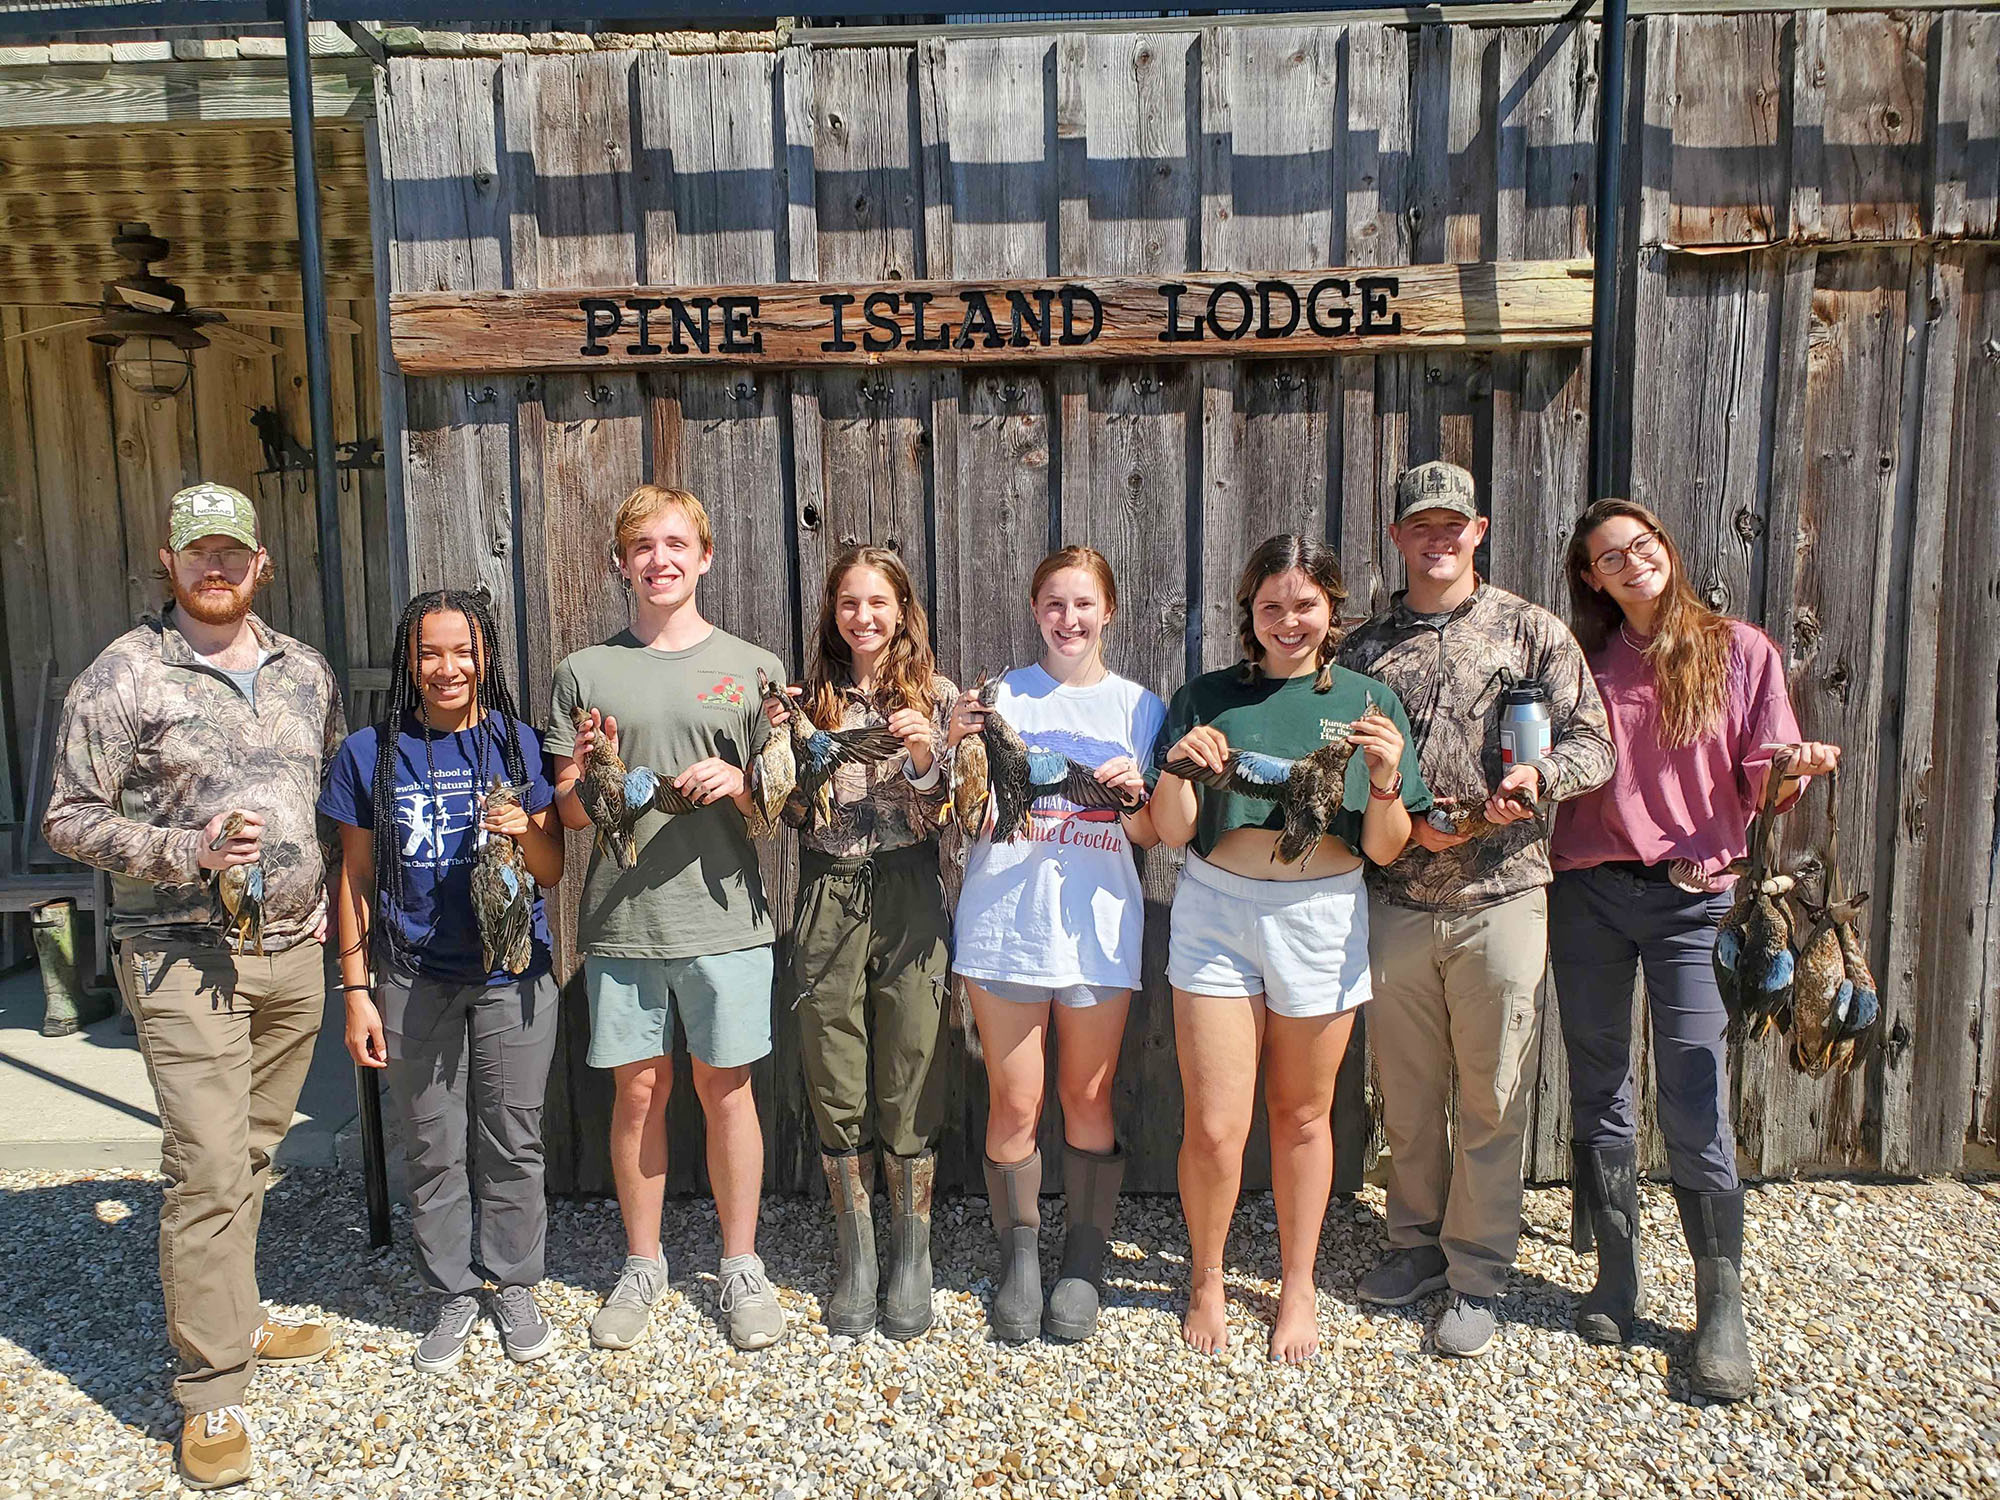 LSU Professors Teach College Kids to Hunt in Hopes of Developing More Pro-Hunting Wildlife Professionals